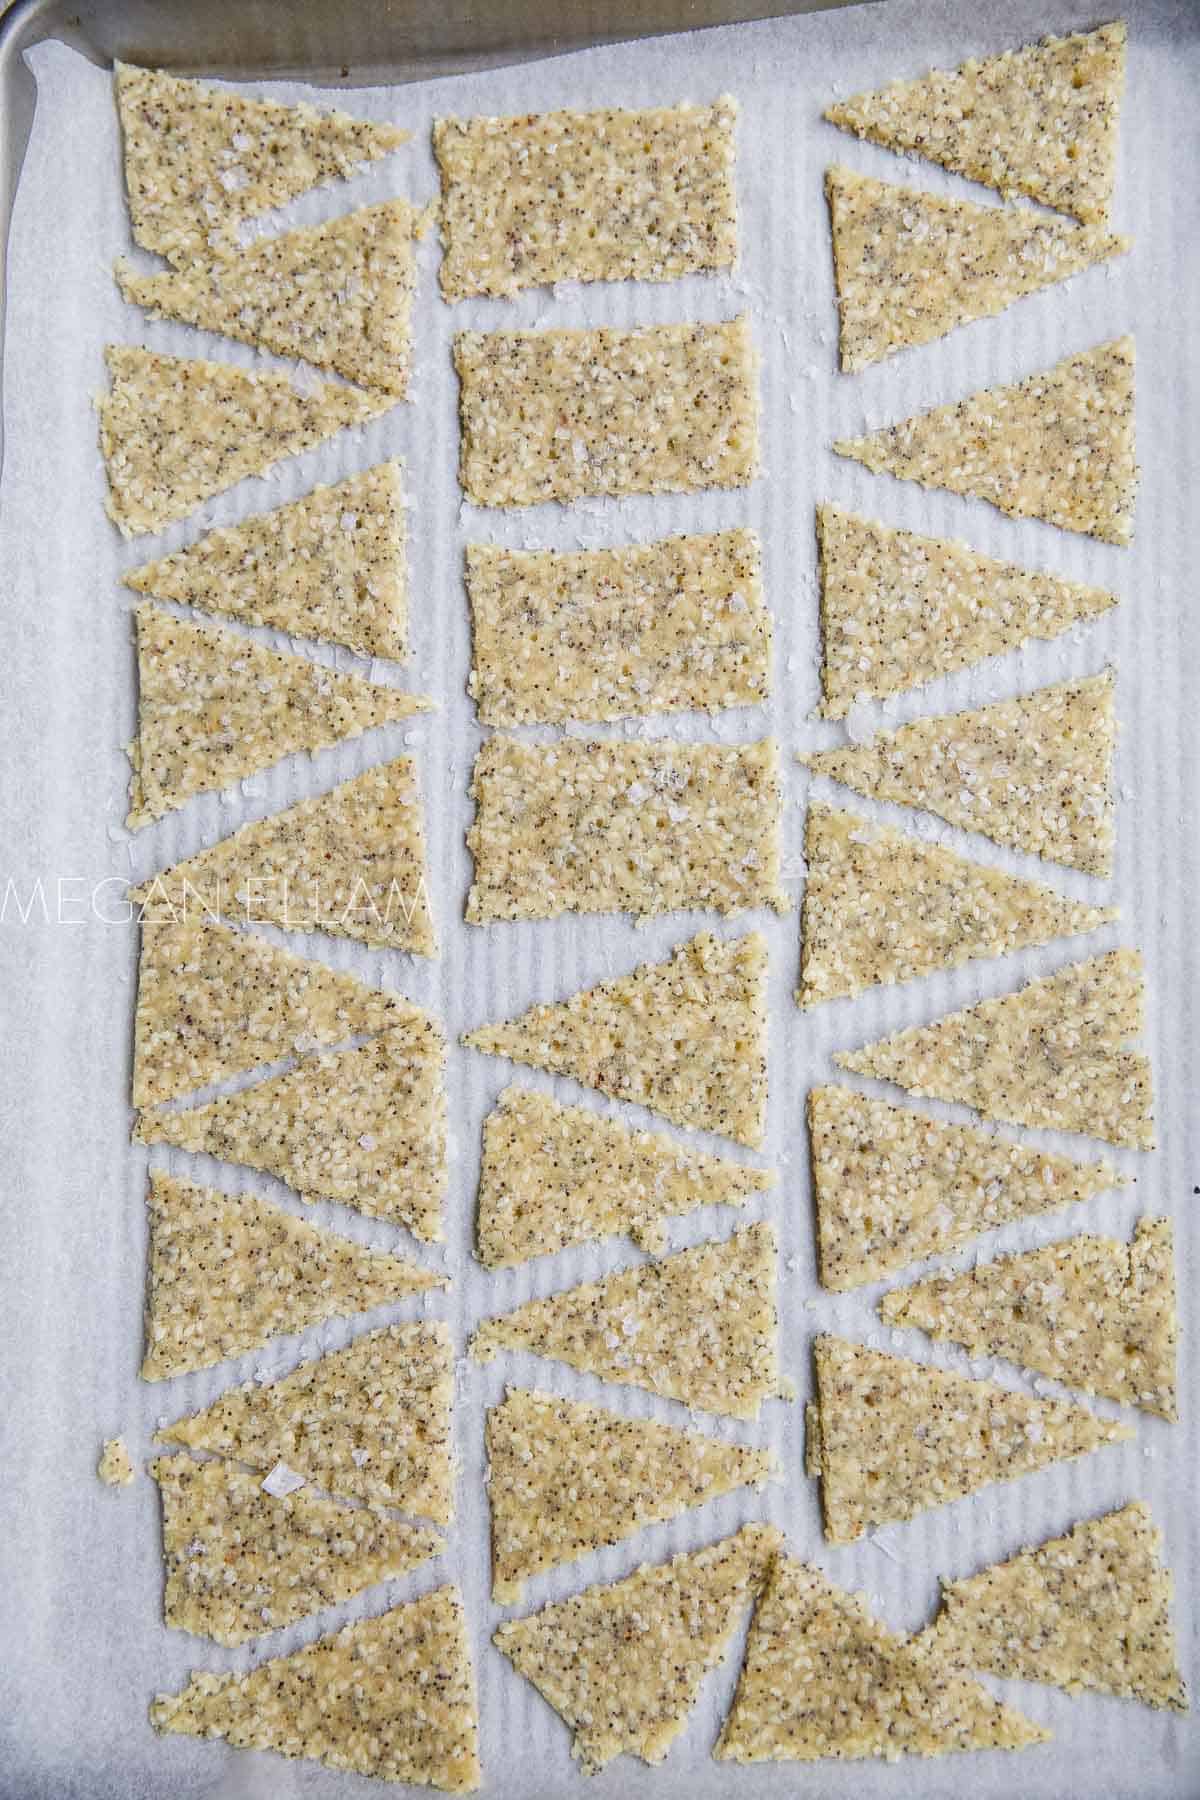 Raw rolled and shaped crackers on a baking tray.